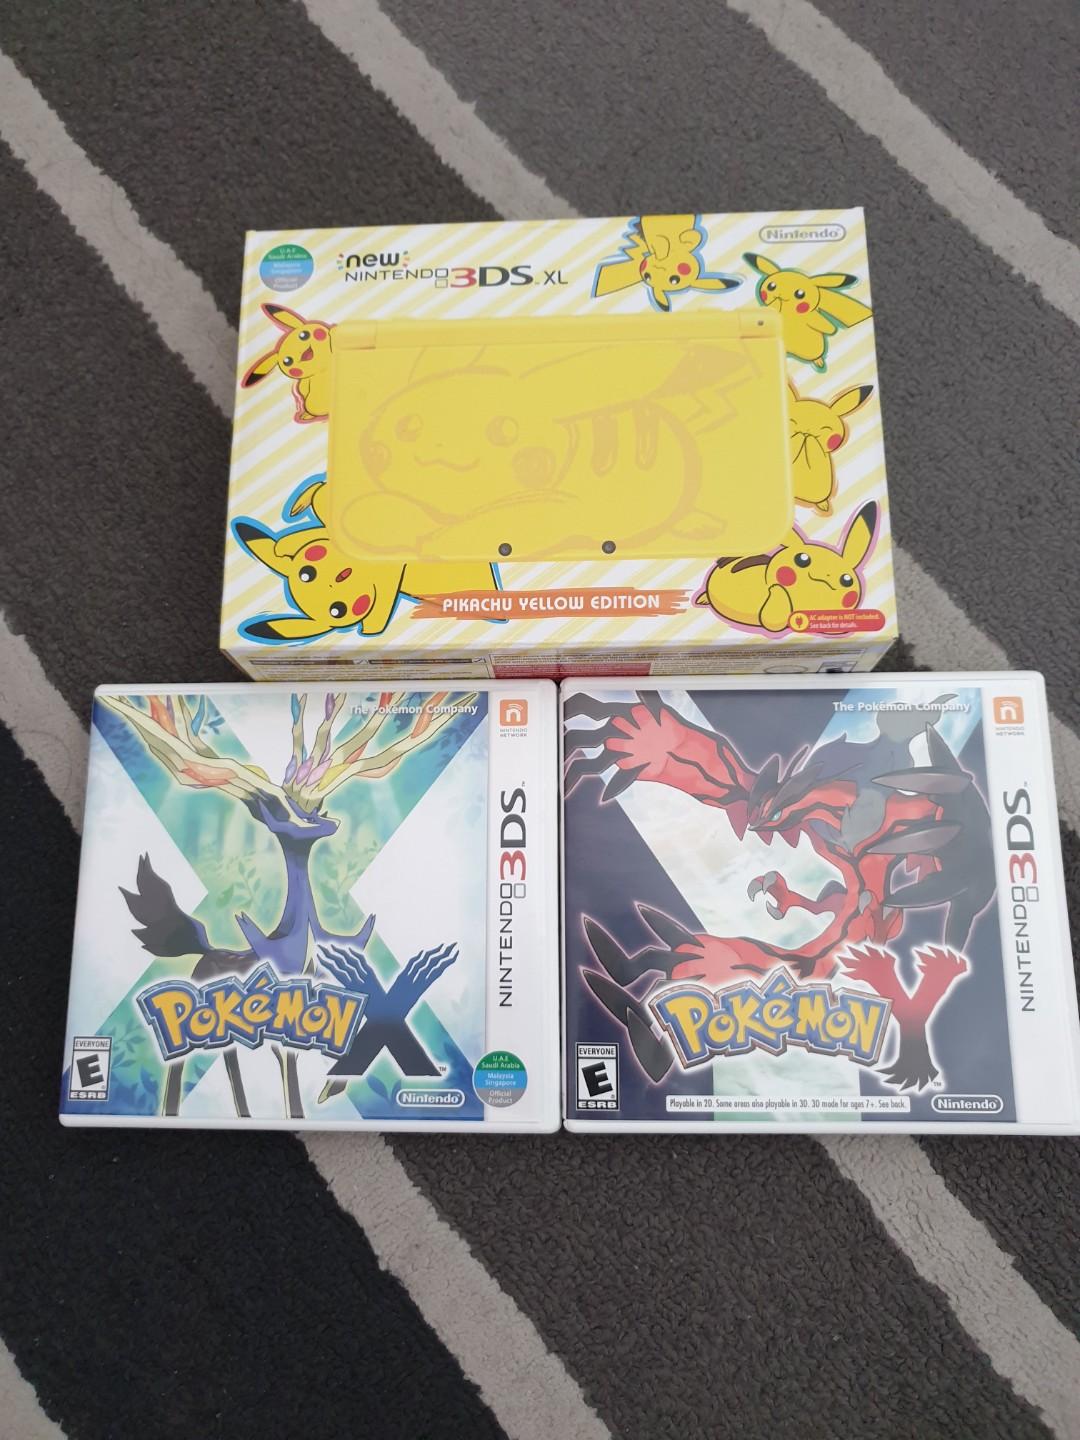 New Nintendo 3ds Xl Pikachu Edition W 2 Games Toys Games Video Gaming Video Games On Carousell